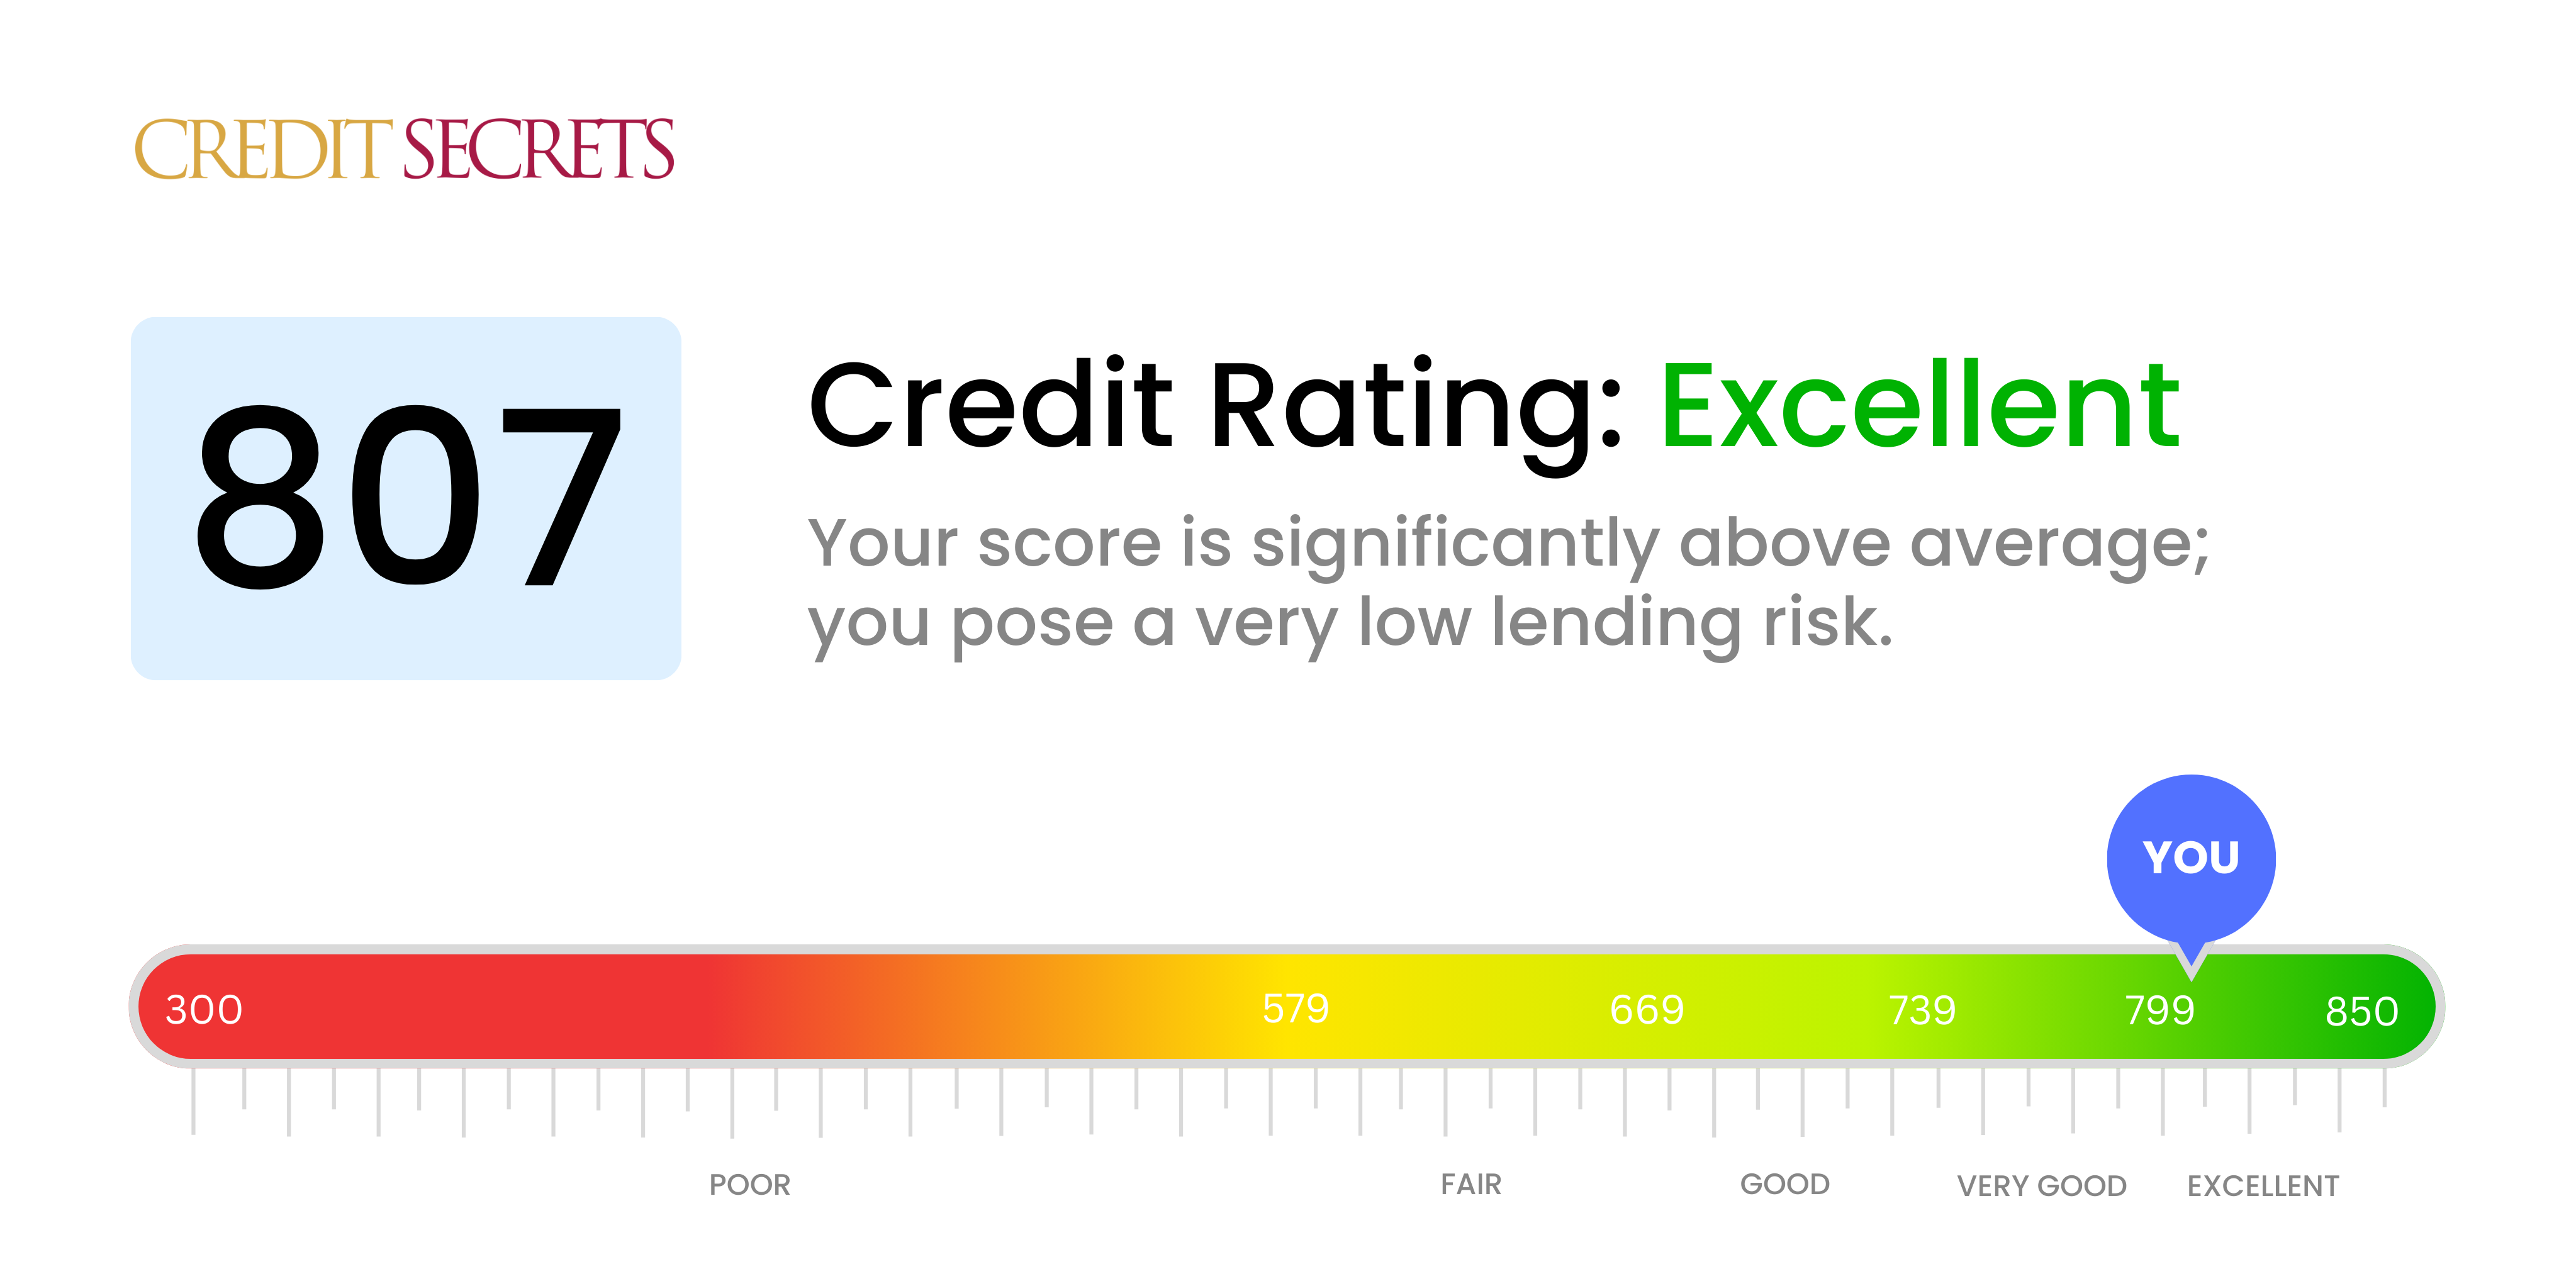 Is 807 a good credit score?